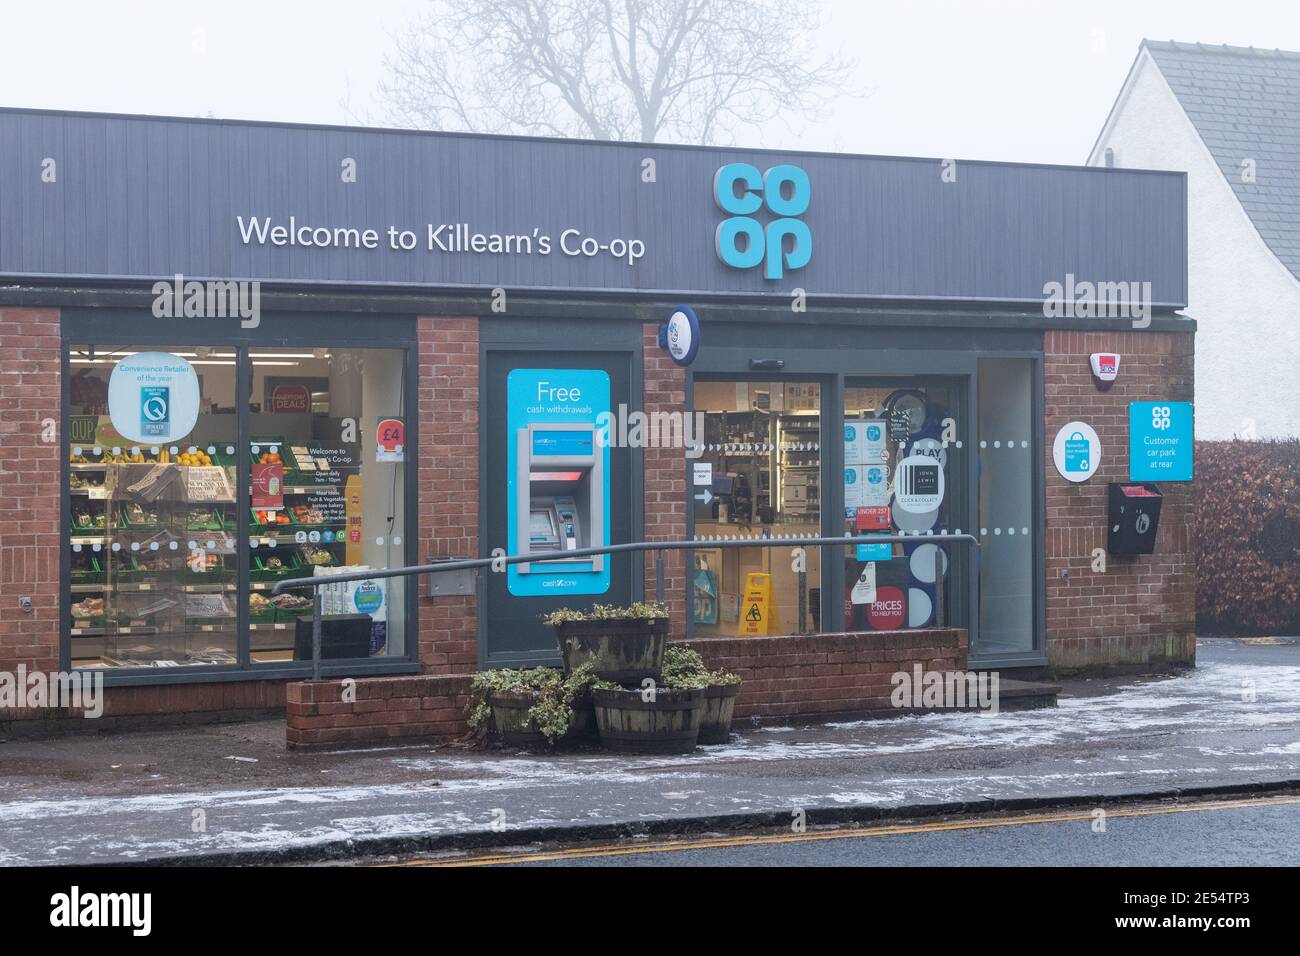 coop shop store in village with cash dispenser and wheelchair access ramp - Killearn, Stirling, Scotland, UK Stock Photo